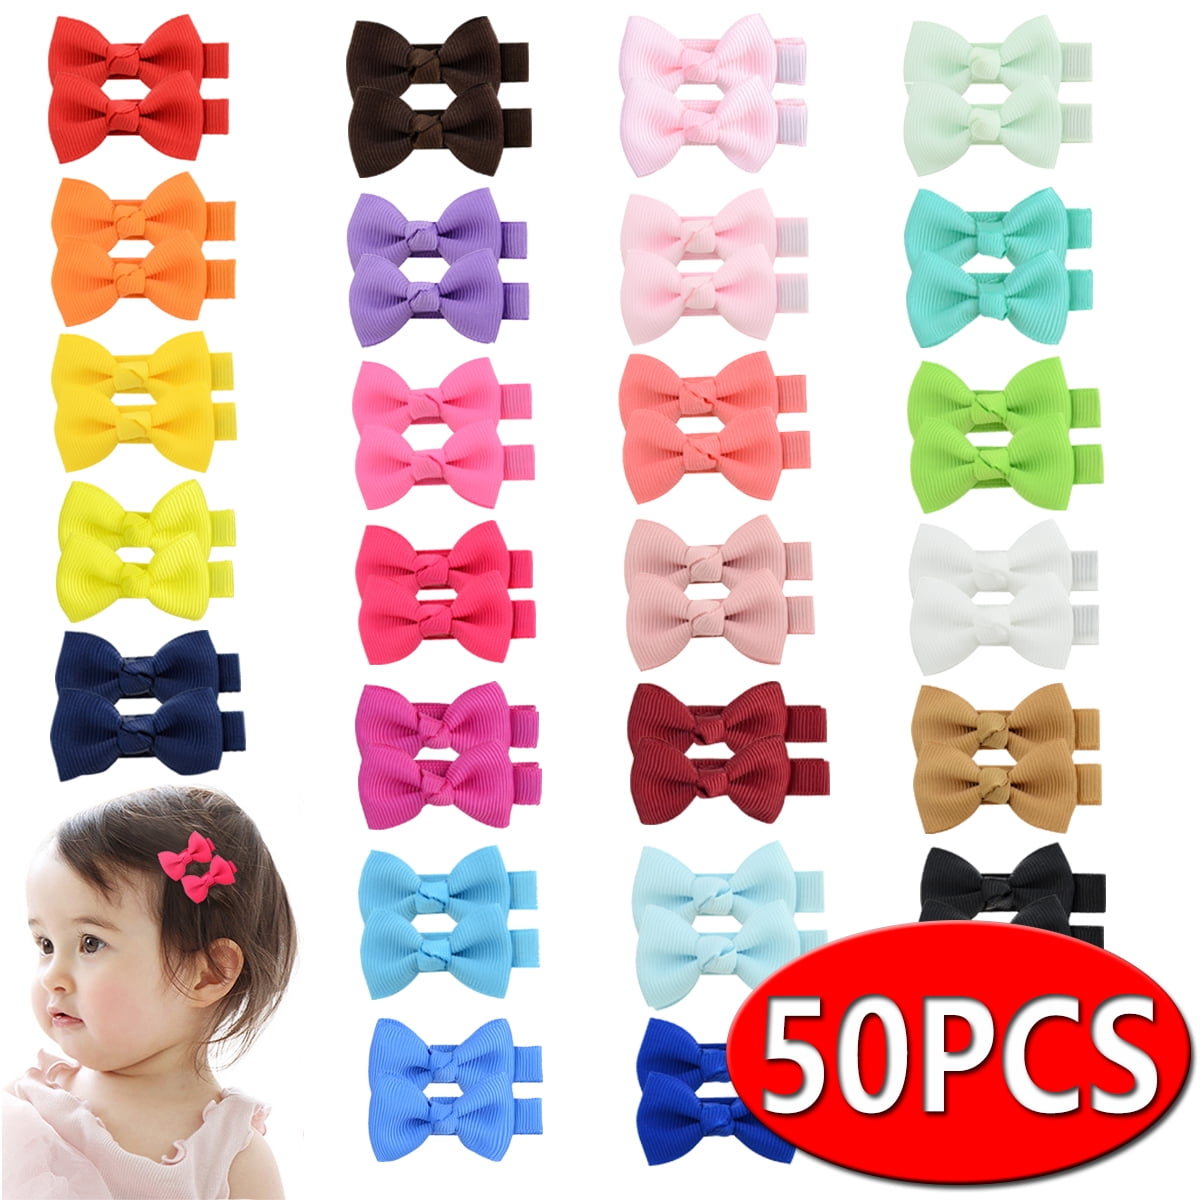  FOMIYES 40 pcs hollow hair clip hair accessories Kid hair  clips for girls 8-12 claw clips for thick hair bows hair barrettes hair  clips for women small hair clips iron